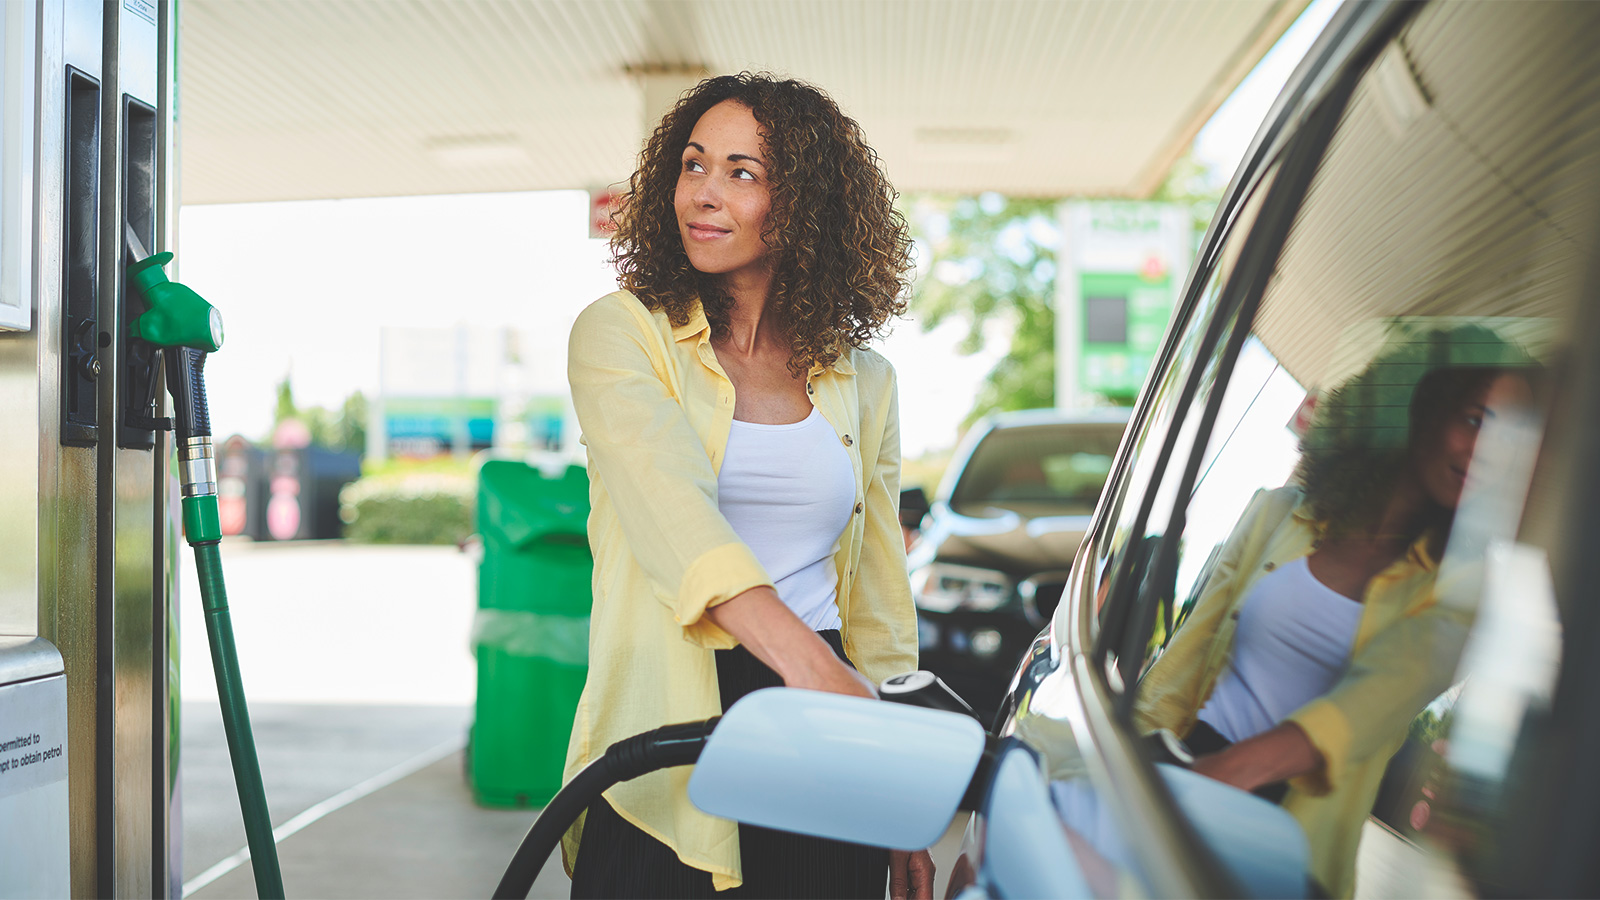 A woman fills up her vehicle with biofuels